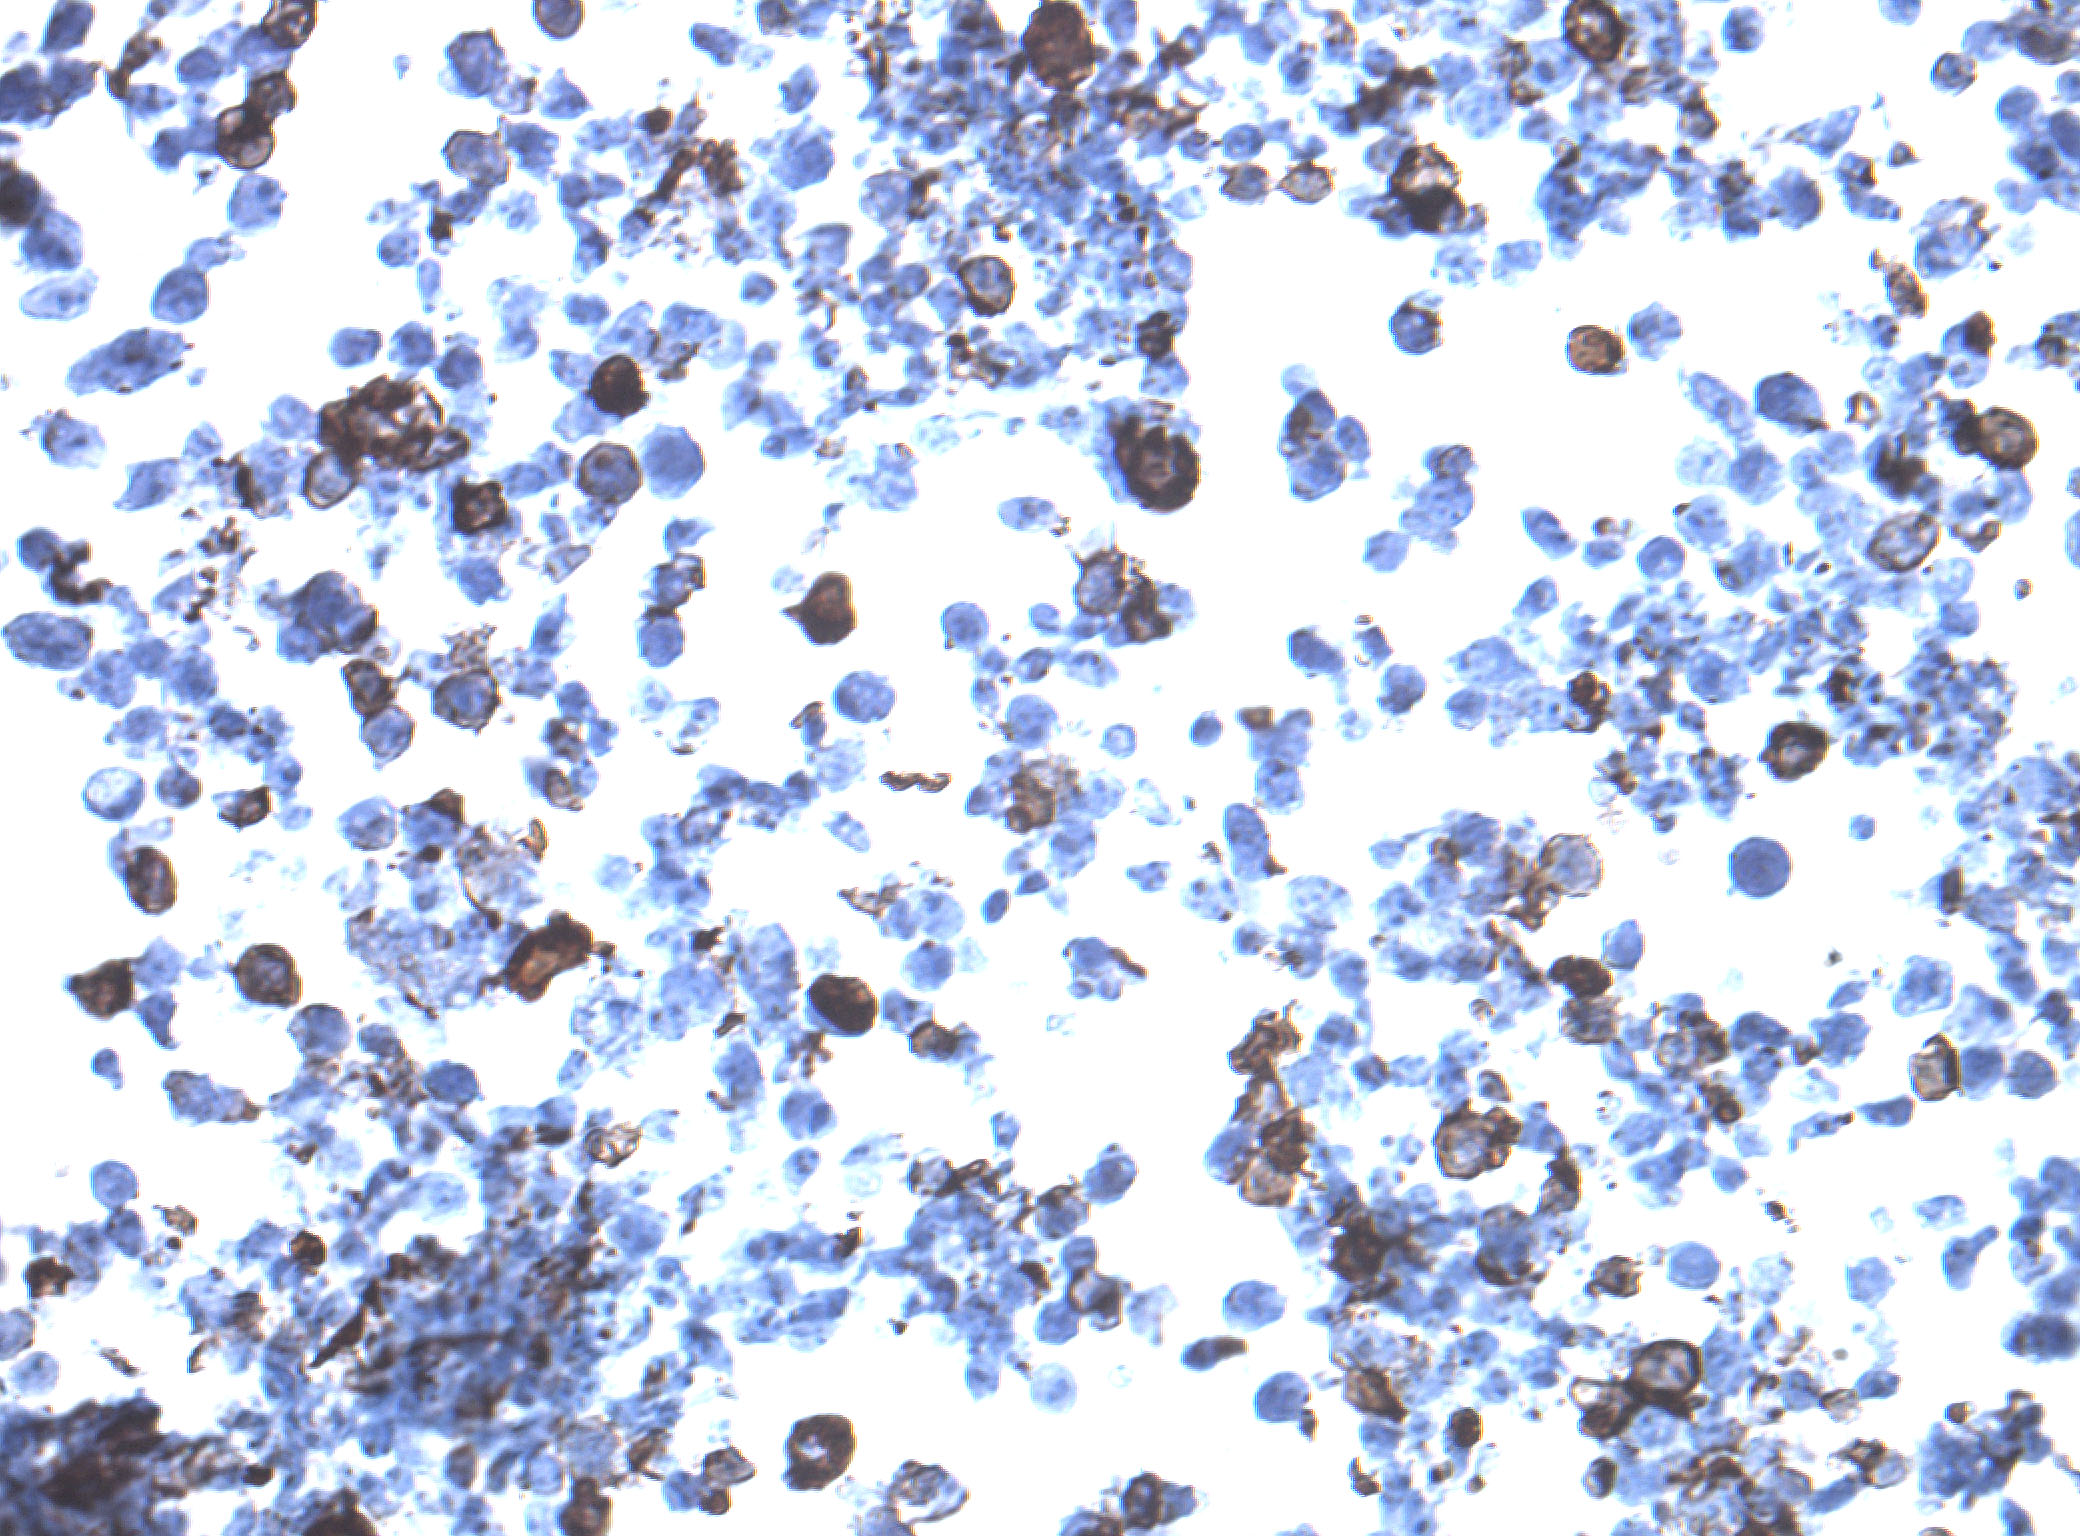 Immunohistology staining on ATP2B4 overexpressed cytosection TS413835P5 with mouse anti DDK clone OTI11C3 C/N TA180144 at 1:400 dilution 4C O/N. Antibody staining was achieved with HIER Citrate pH6 , Polink1 with DAB chromogen detection kit (D11-18). Positive stain shown with the brown chromogen present. HEK293T cells were transfected with cDNA clone RC213835, 5 micron sections, 40x magnification